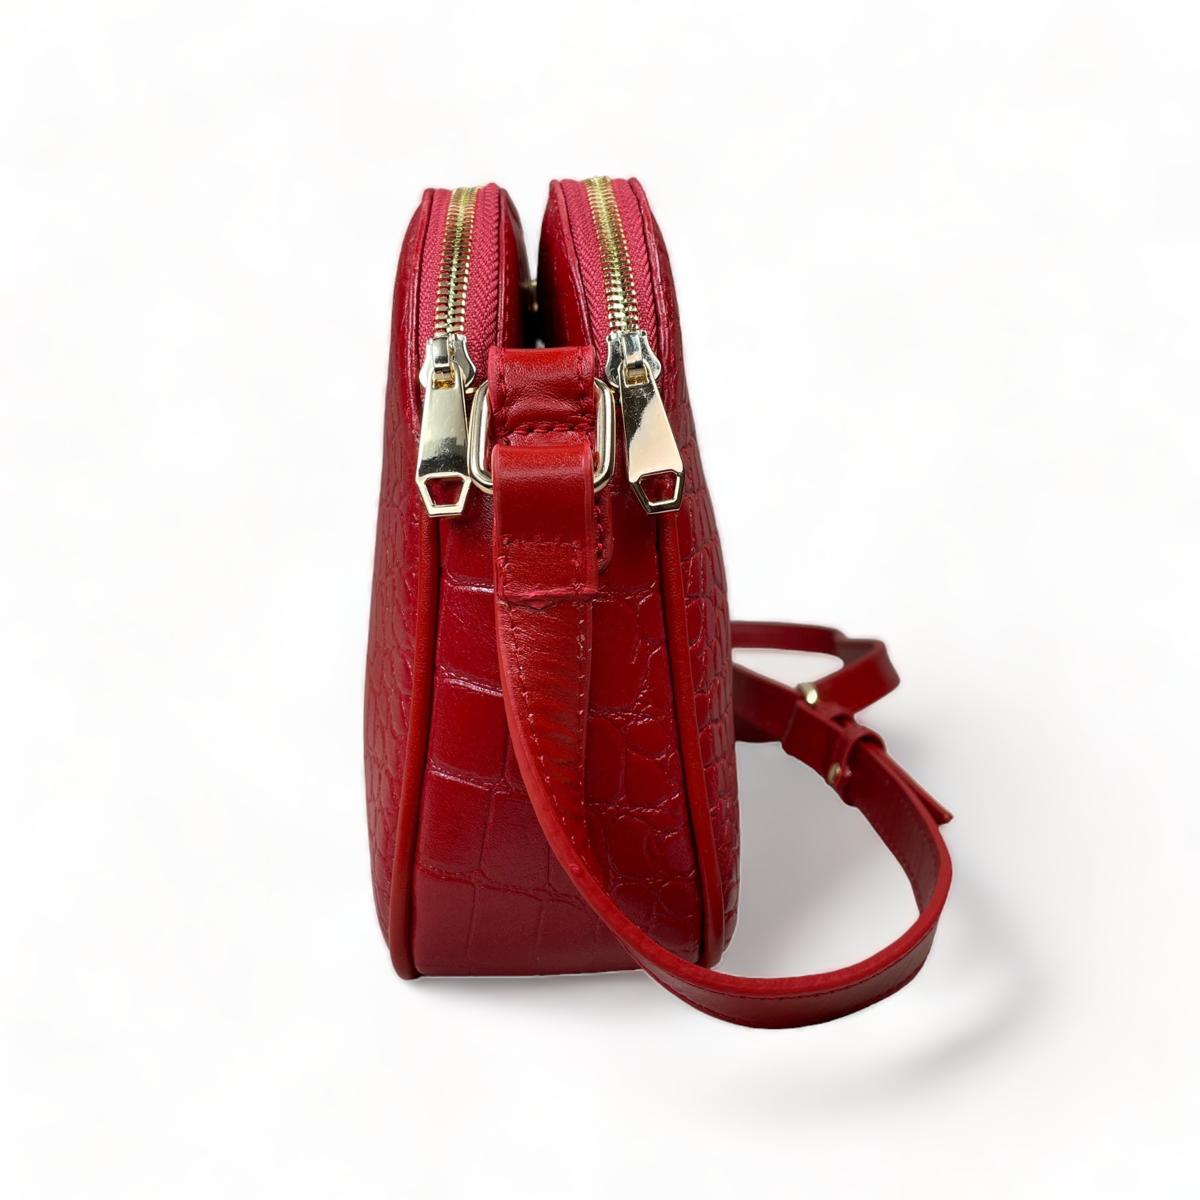 LeatherLuxe - Red Leather Women's Shoulder Bag; Crossbody; Crocodile Style Genuine leather Designer Premium leather bag for women leather hobo tote messenger bag Leather Accessories Leather Shop Leather Goods